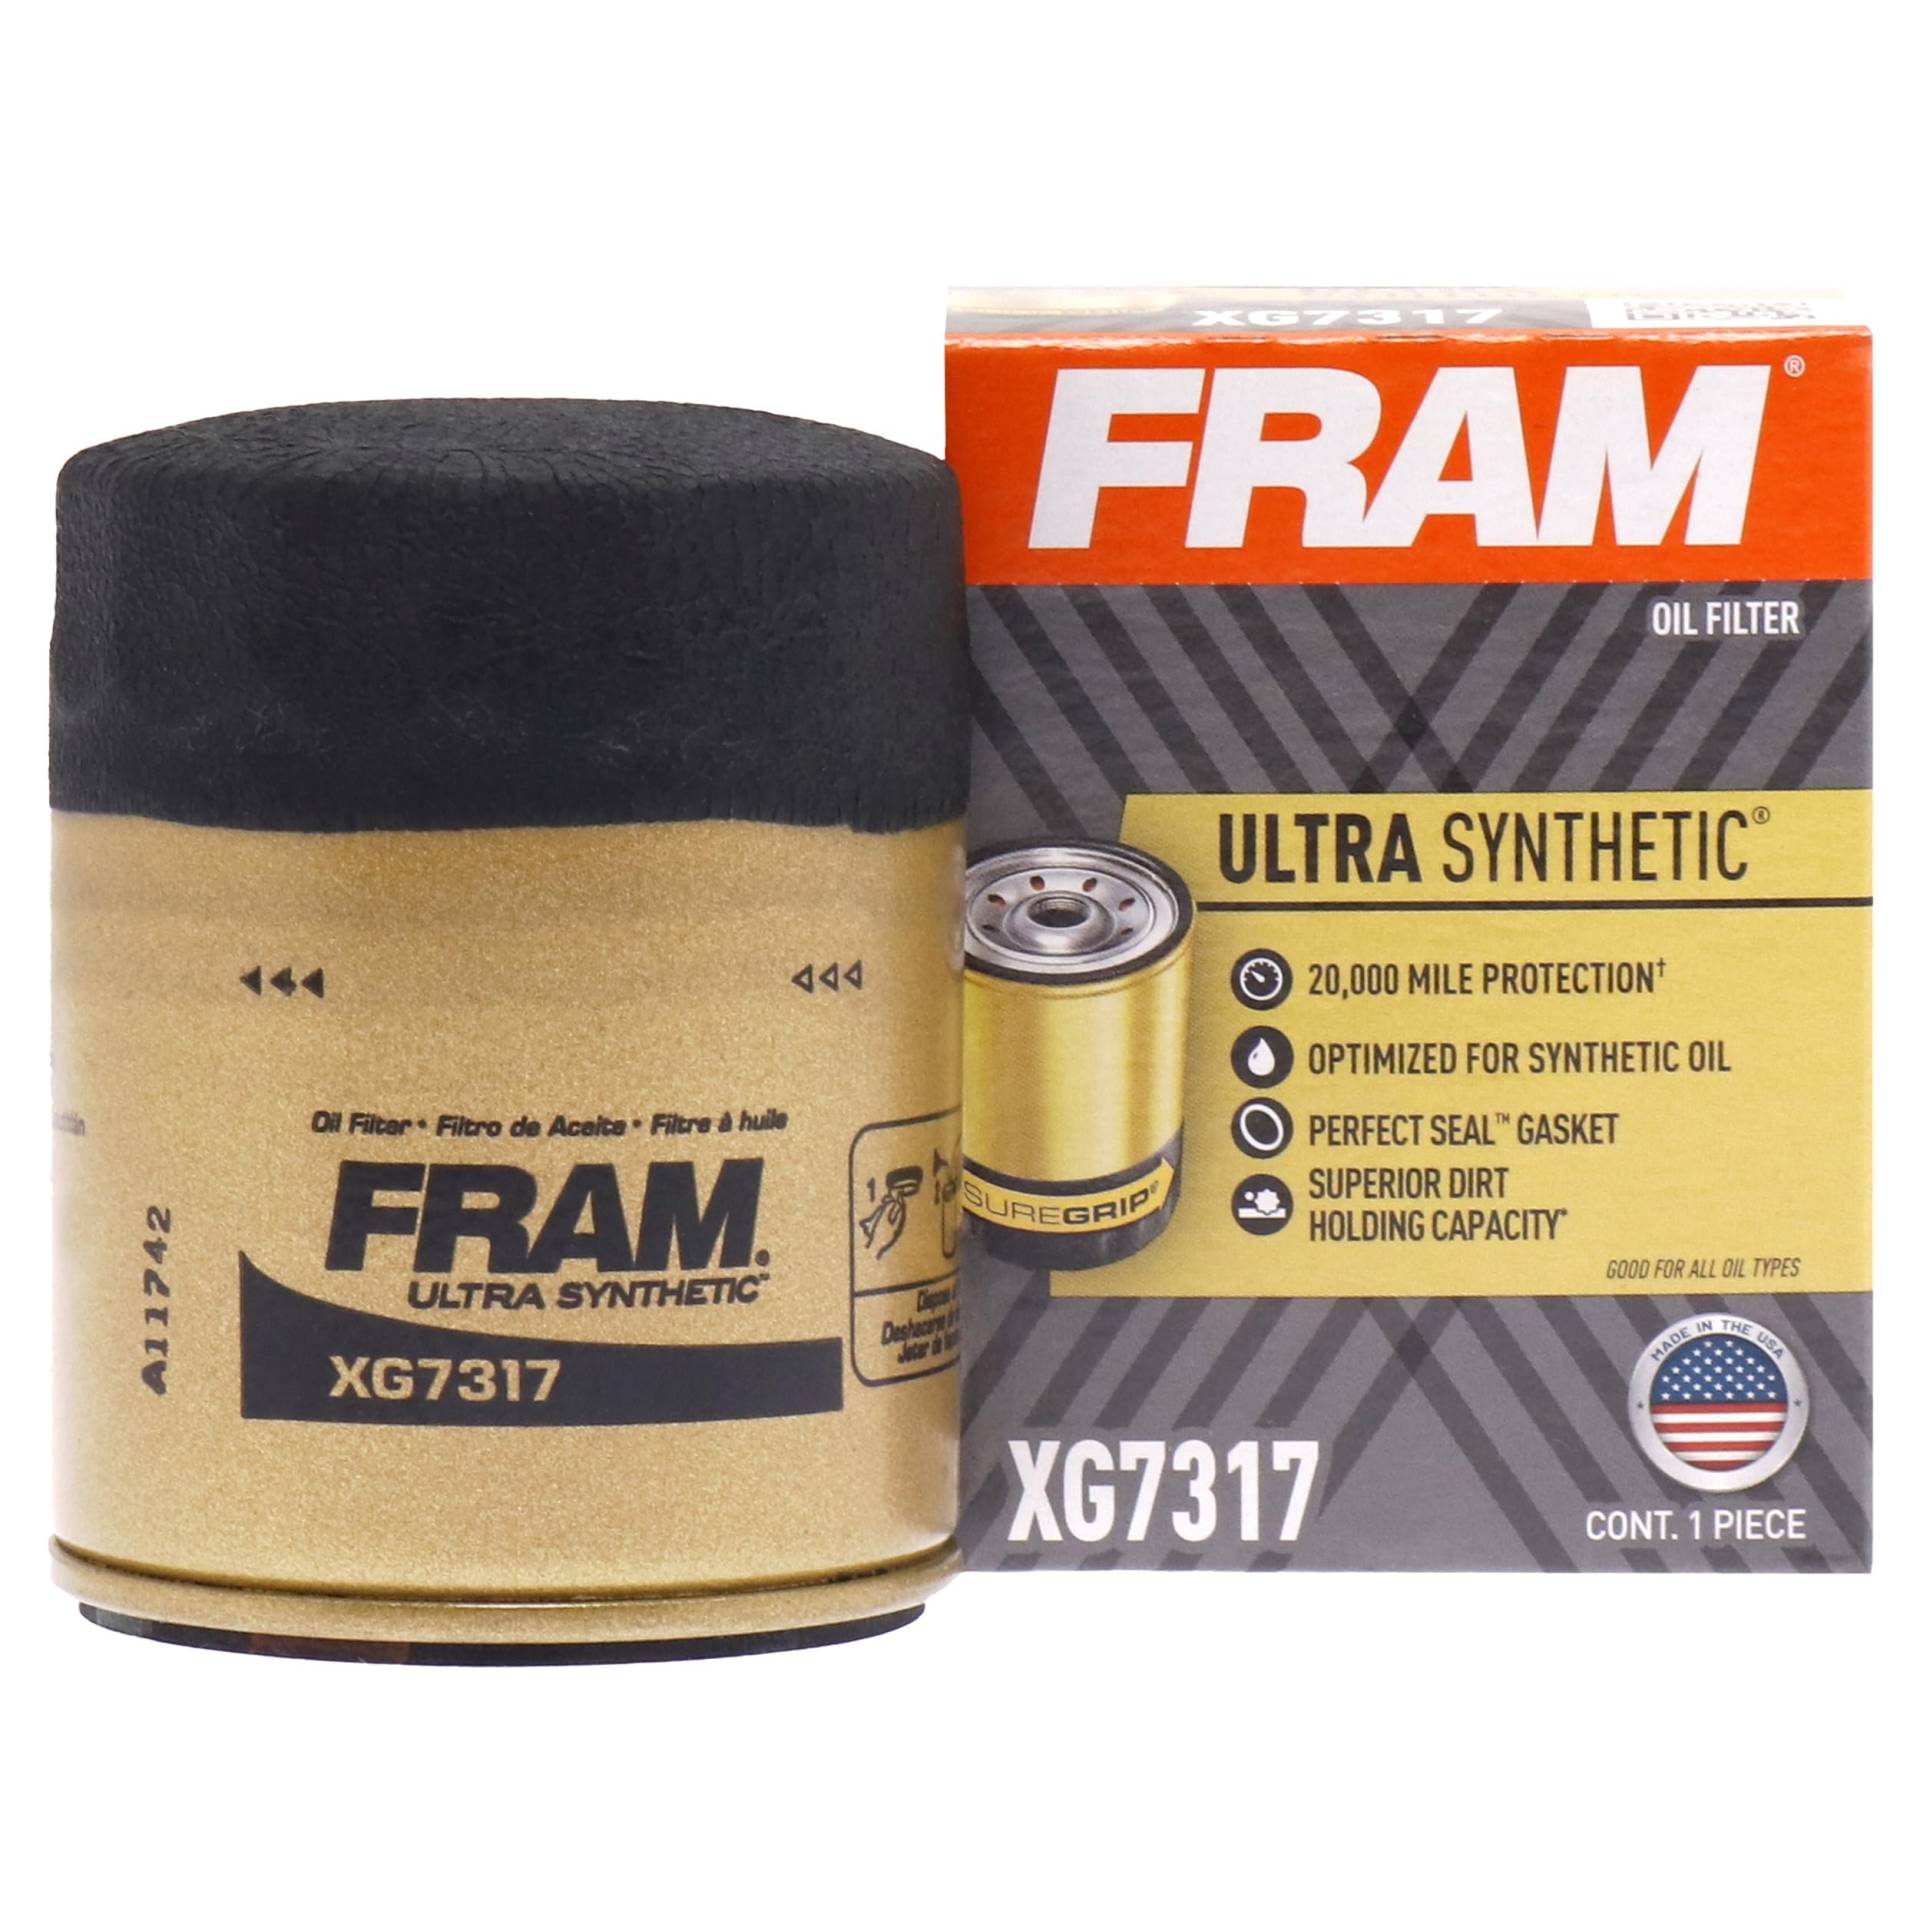 FRAM Ultra Synthetic 20.000 Mile Protection Oil Filter XG7317 with SureGrip (1 Stück) von Fram